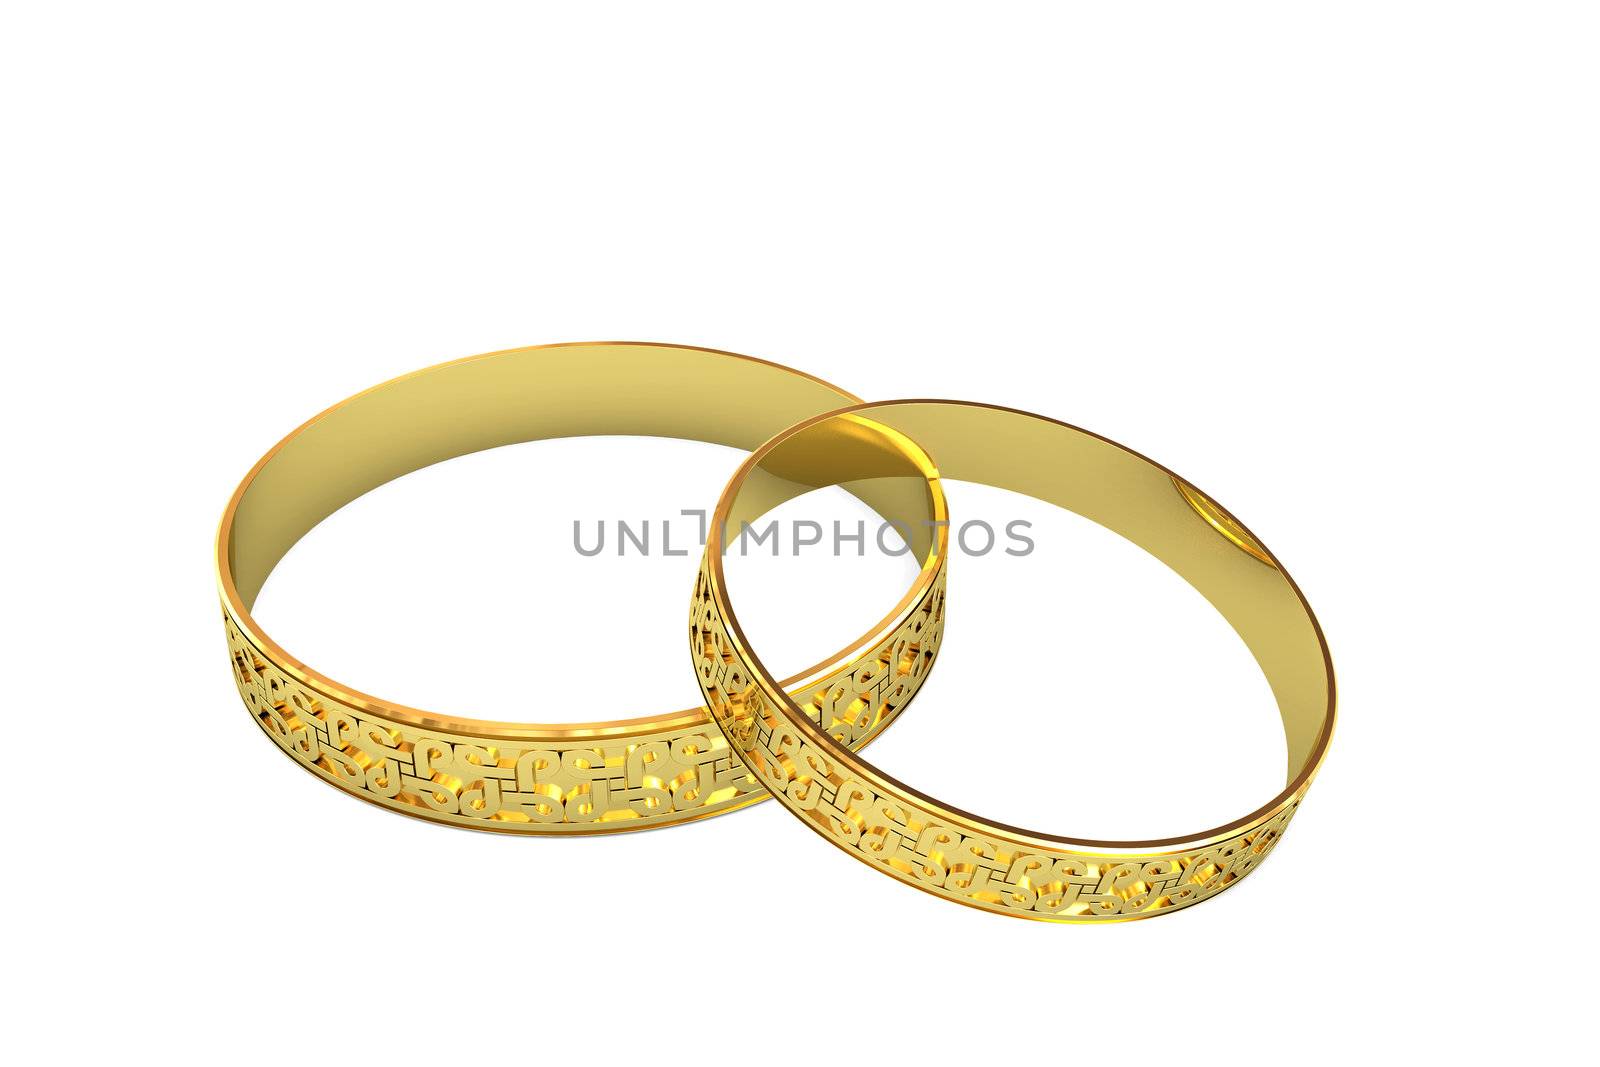 Golden wedding rings with magic tracery isolated on white. High resolution 3D image